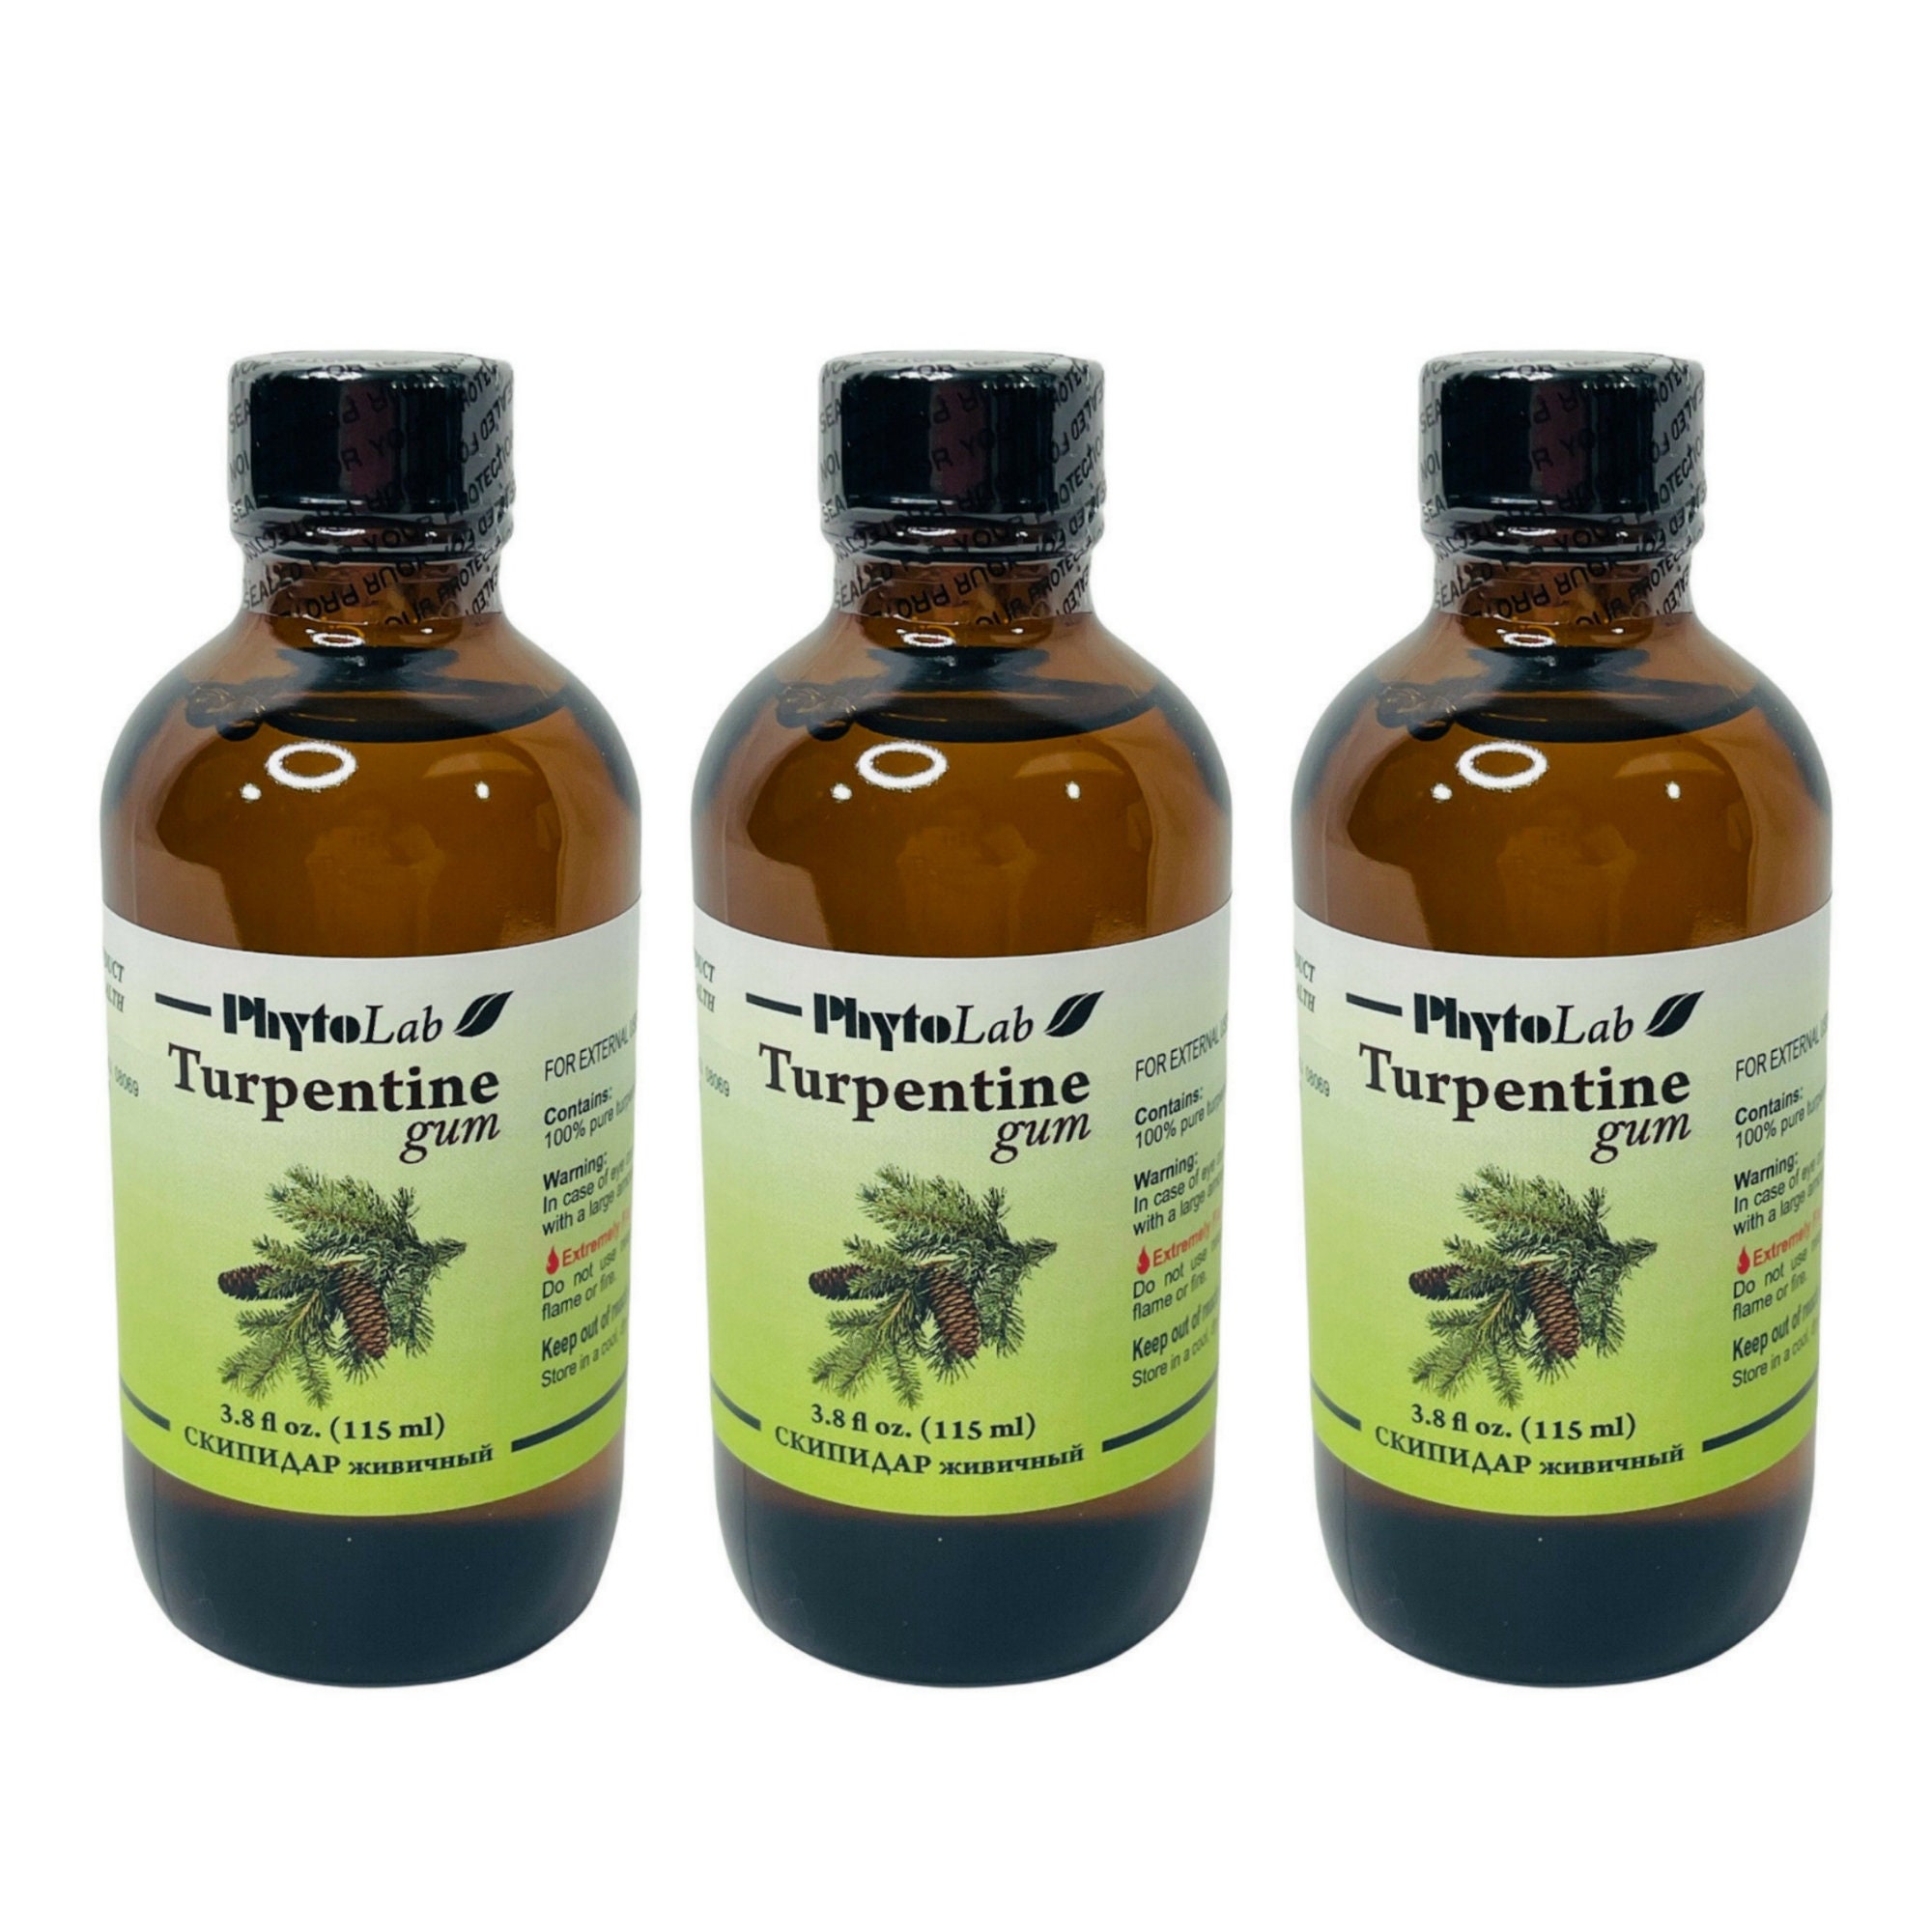  Turpentine Essential Oil, Pinus Palustris, for Painting, Turpentine  Oil, for Pain Relief, 100% Pure Natural, Steam Distilled, 100ml